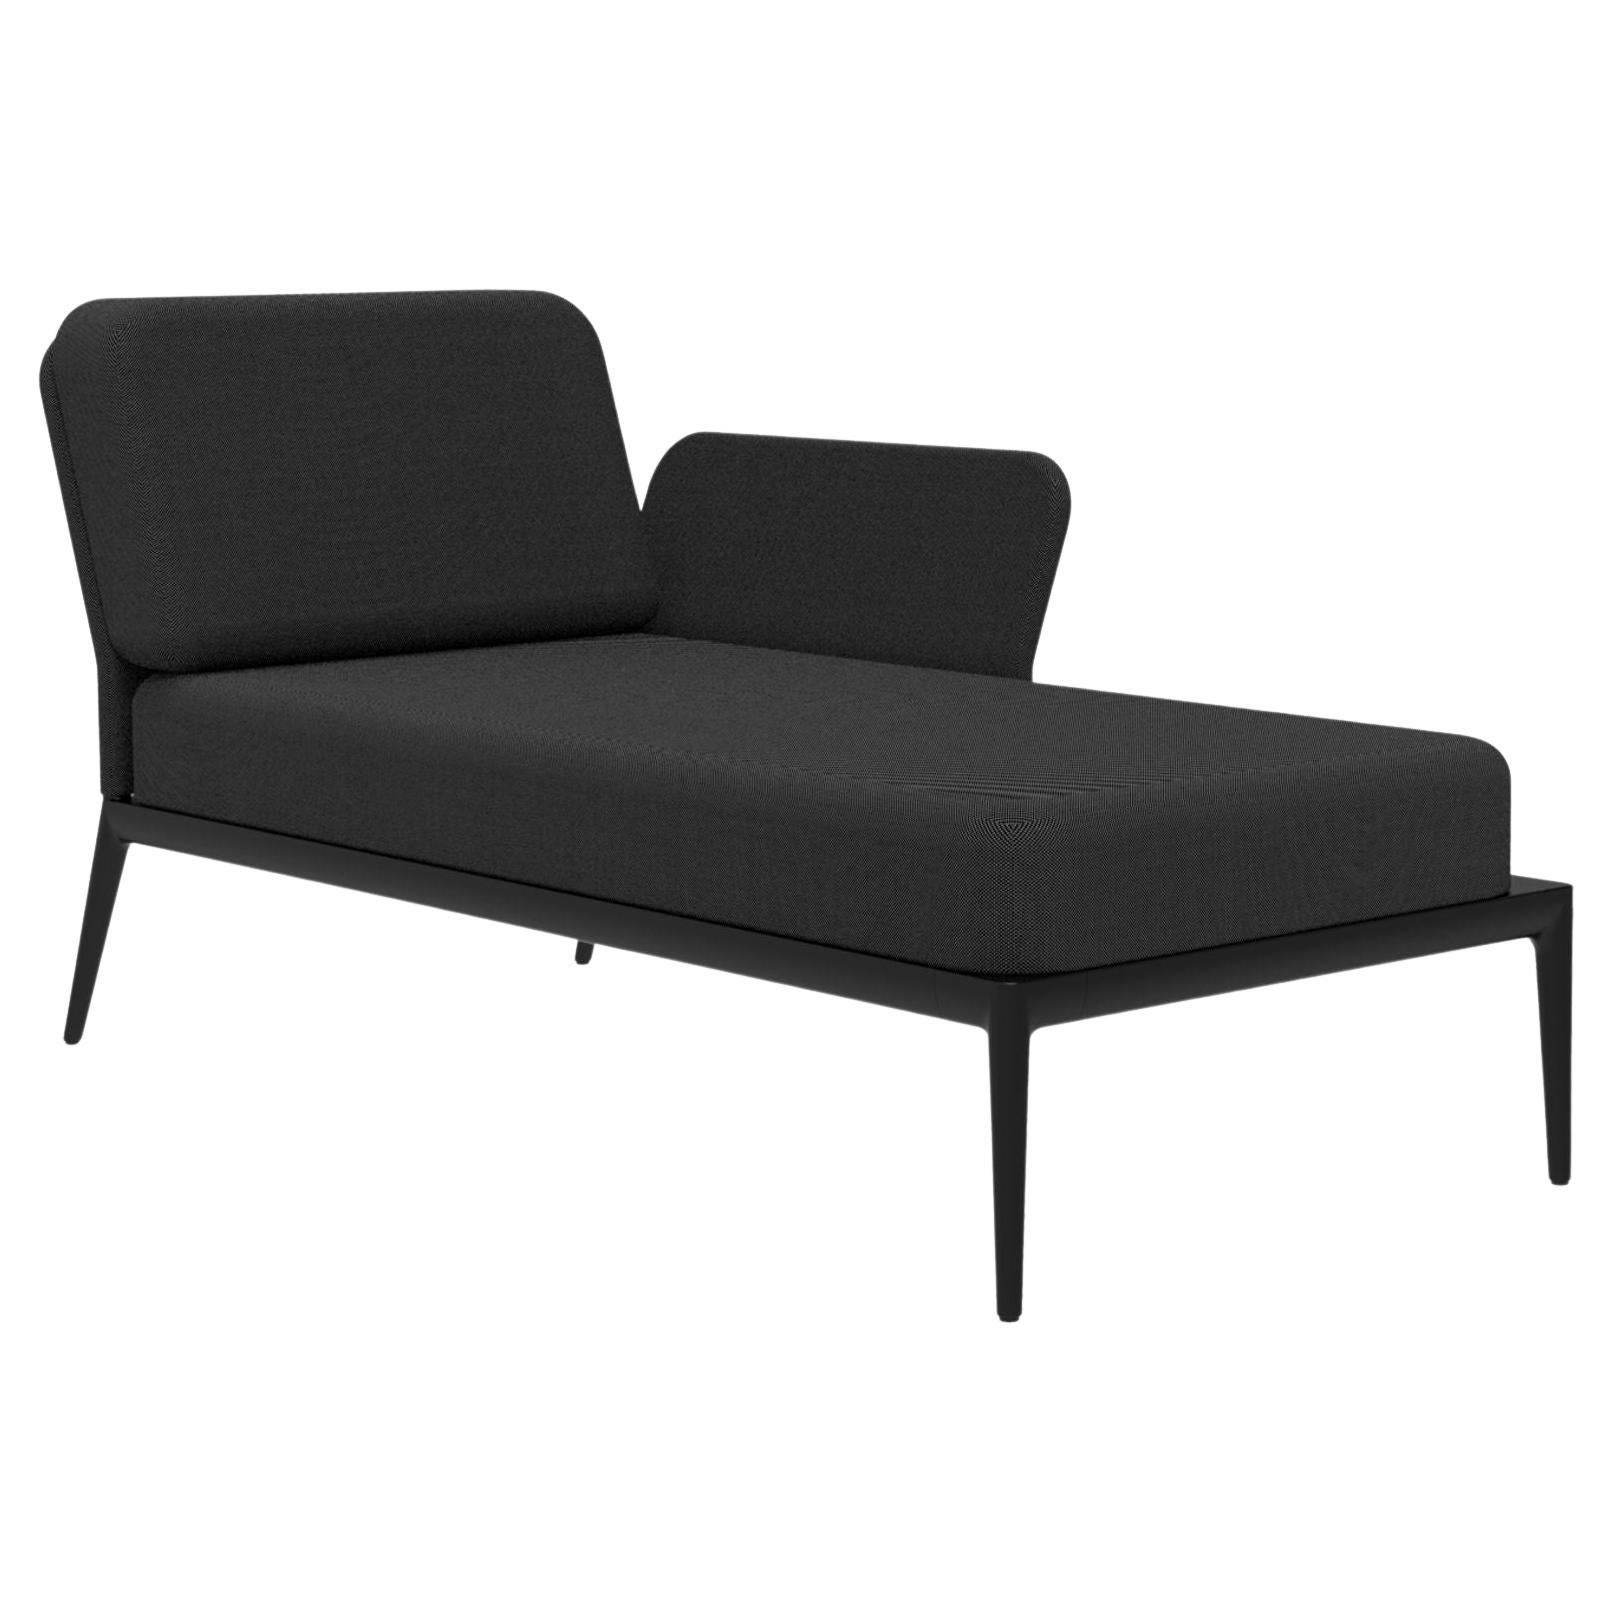 Cover Black Left Chaise Lounge by Mowee